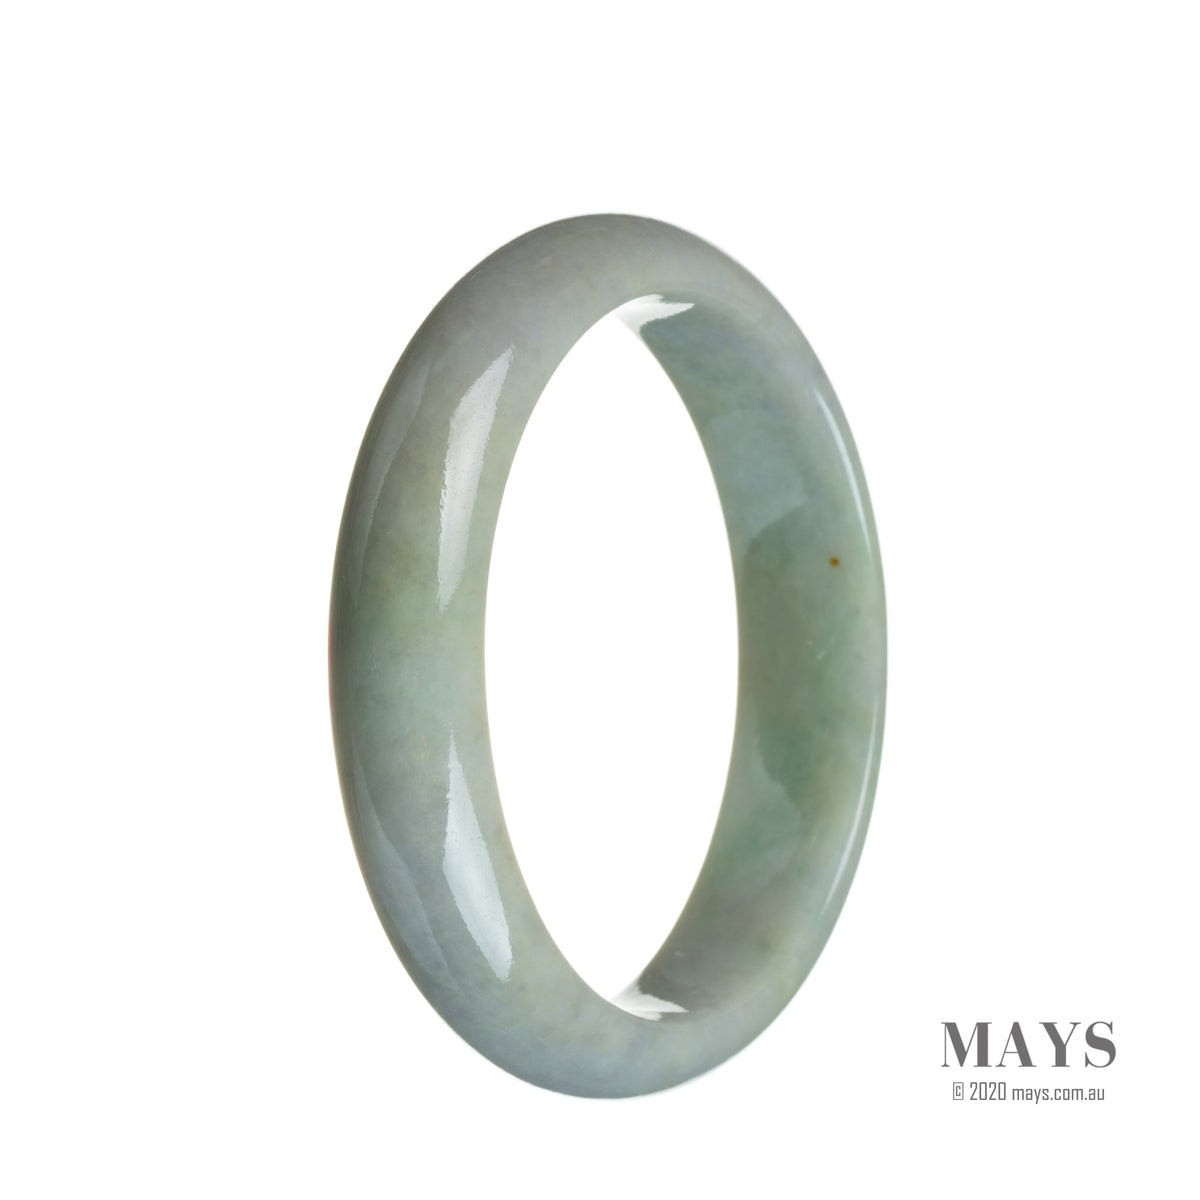 A half-moon shaped jade bangle bracelet with a genuine untreated green stone on a white background.